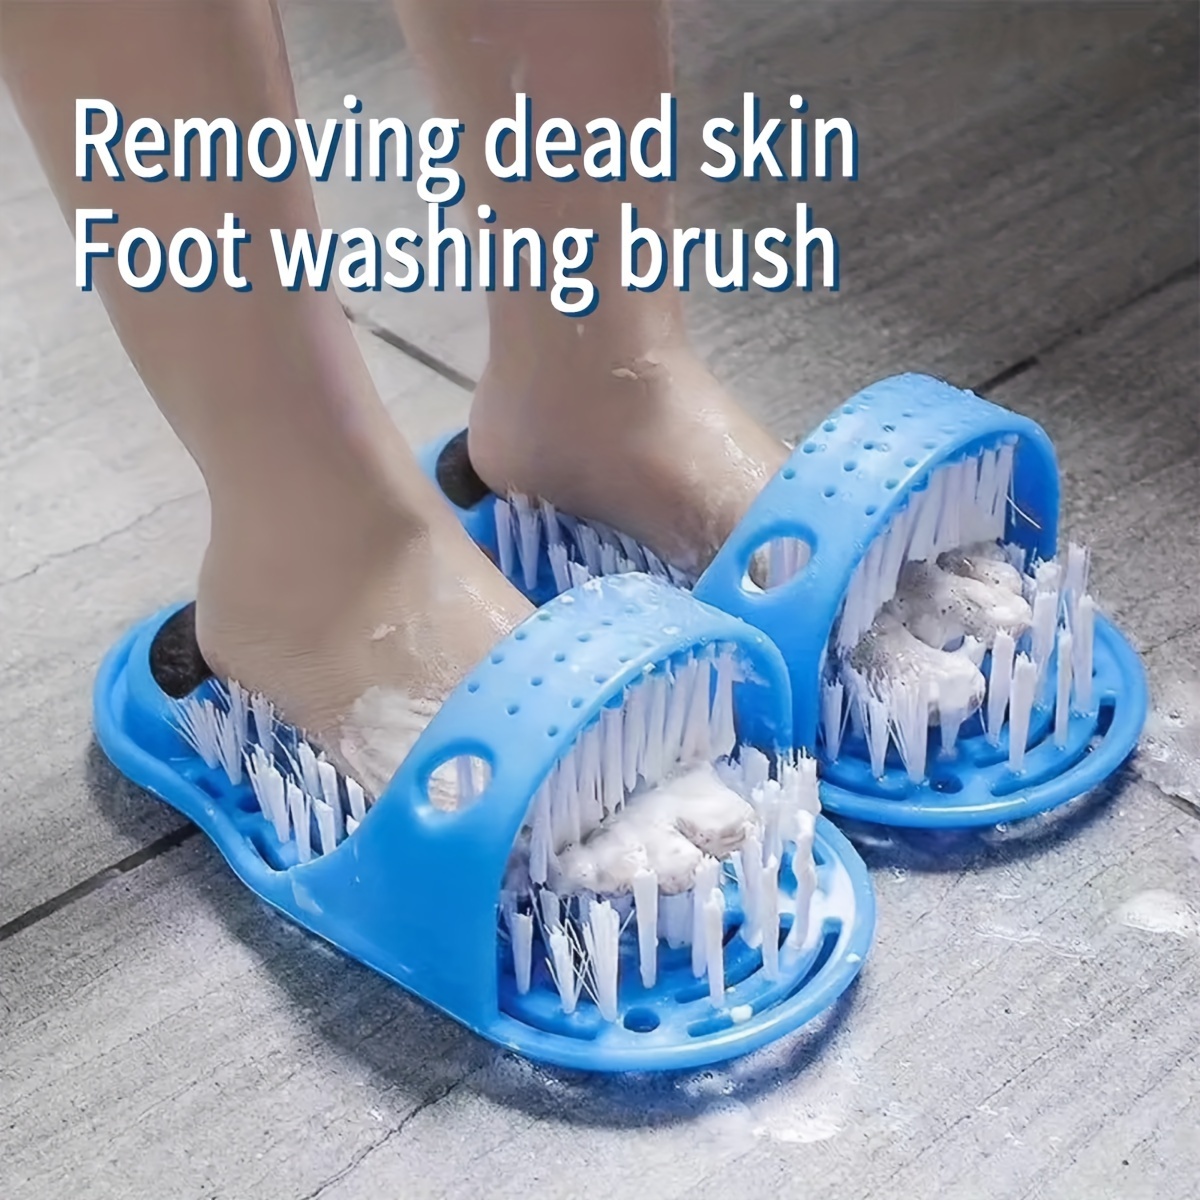 

1pc, Foot Washing Brush Foot Scrub, Foot Scrub Massager Cleaner, Dead Skin Remover For Shower Floor With Suction Cup